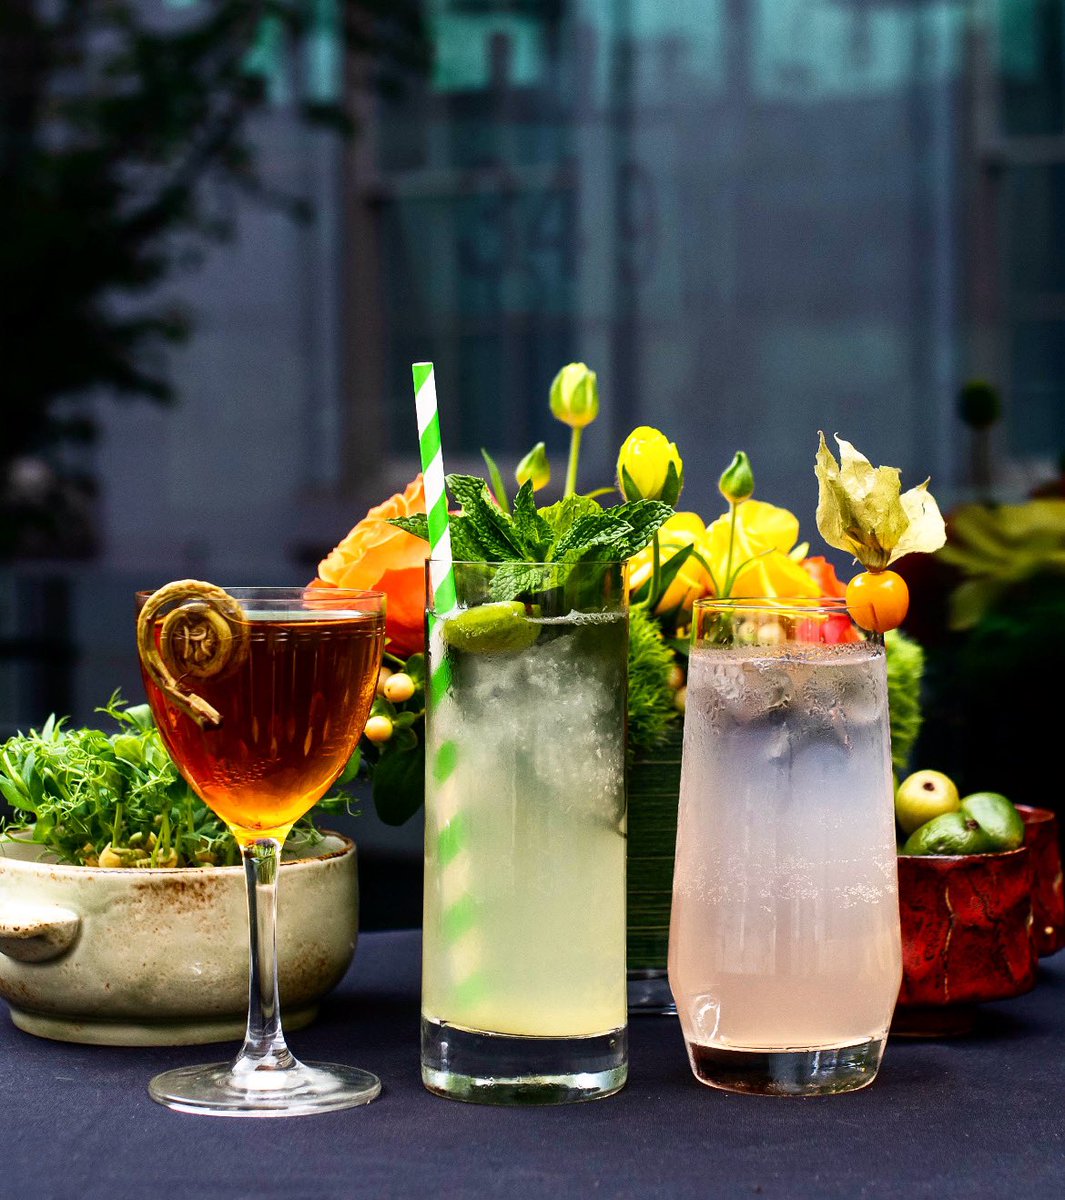 Springtime drinks are in bloom here at Dirty Habit. Join us to enjoy the season’s greatest libations. #FindYours